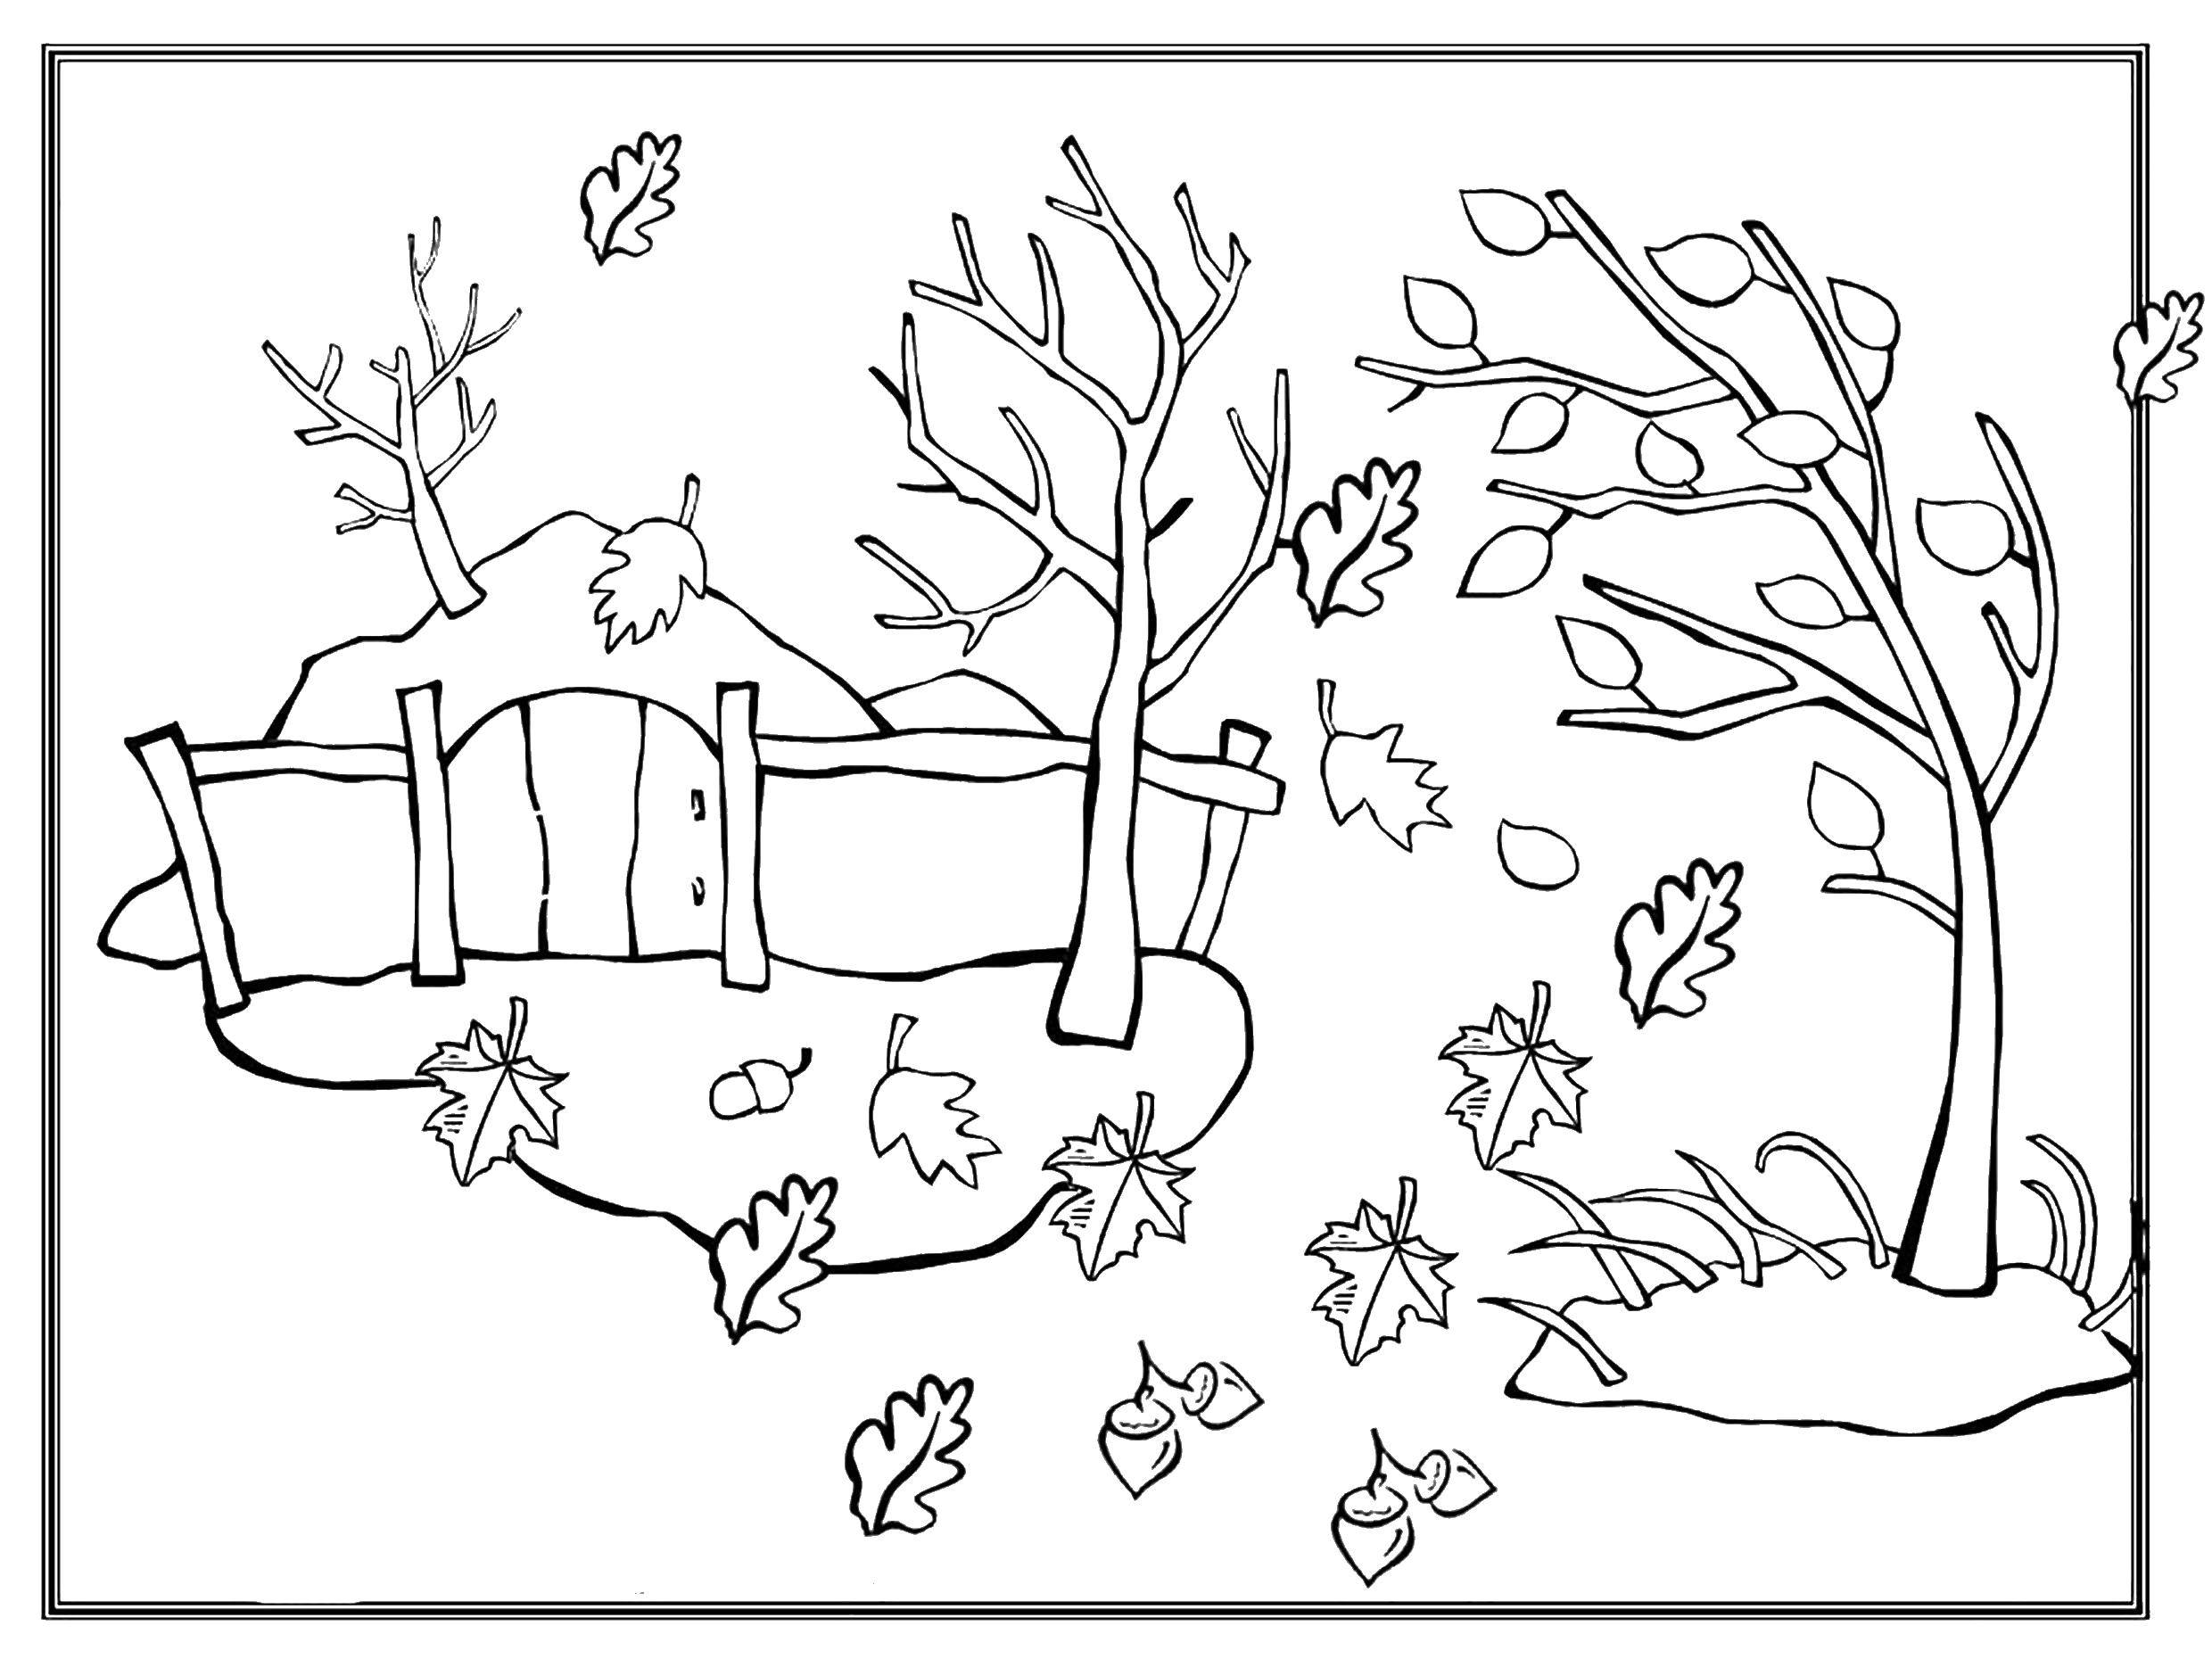 Coloring Autumn wind picks leaves from trees. Category Nature. Tags:  Forest, autumn, leaves.